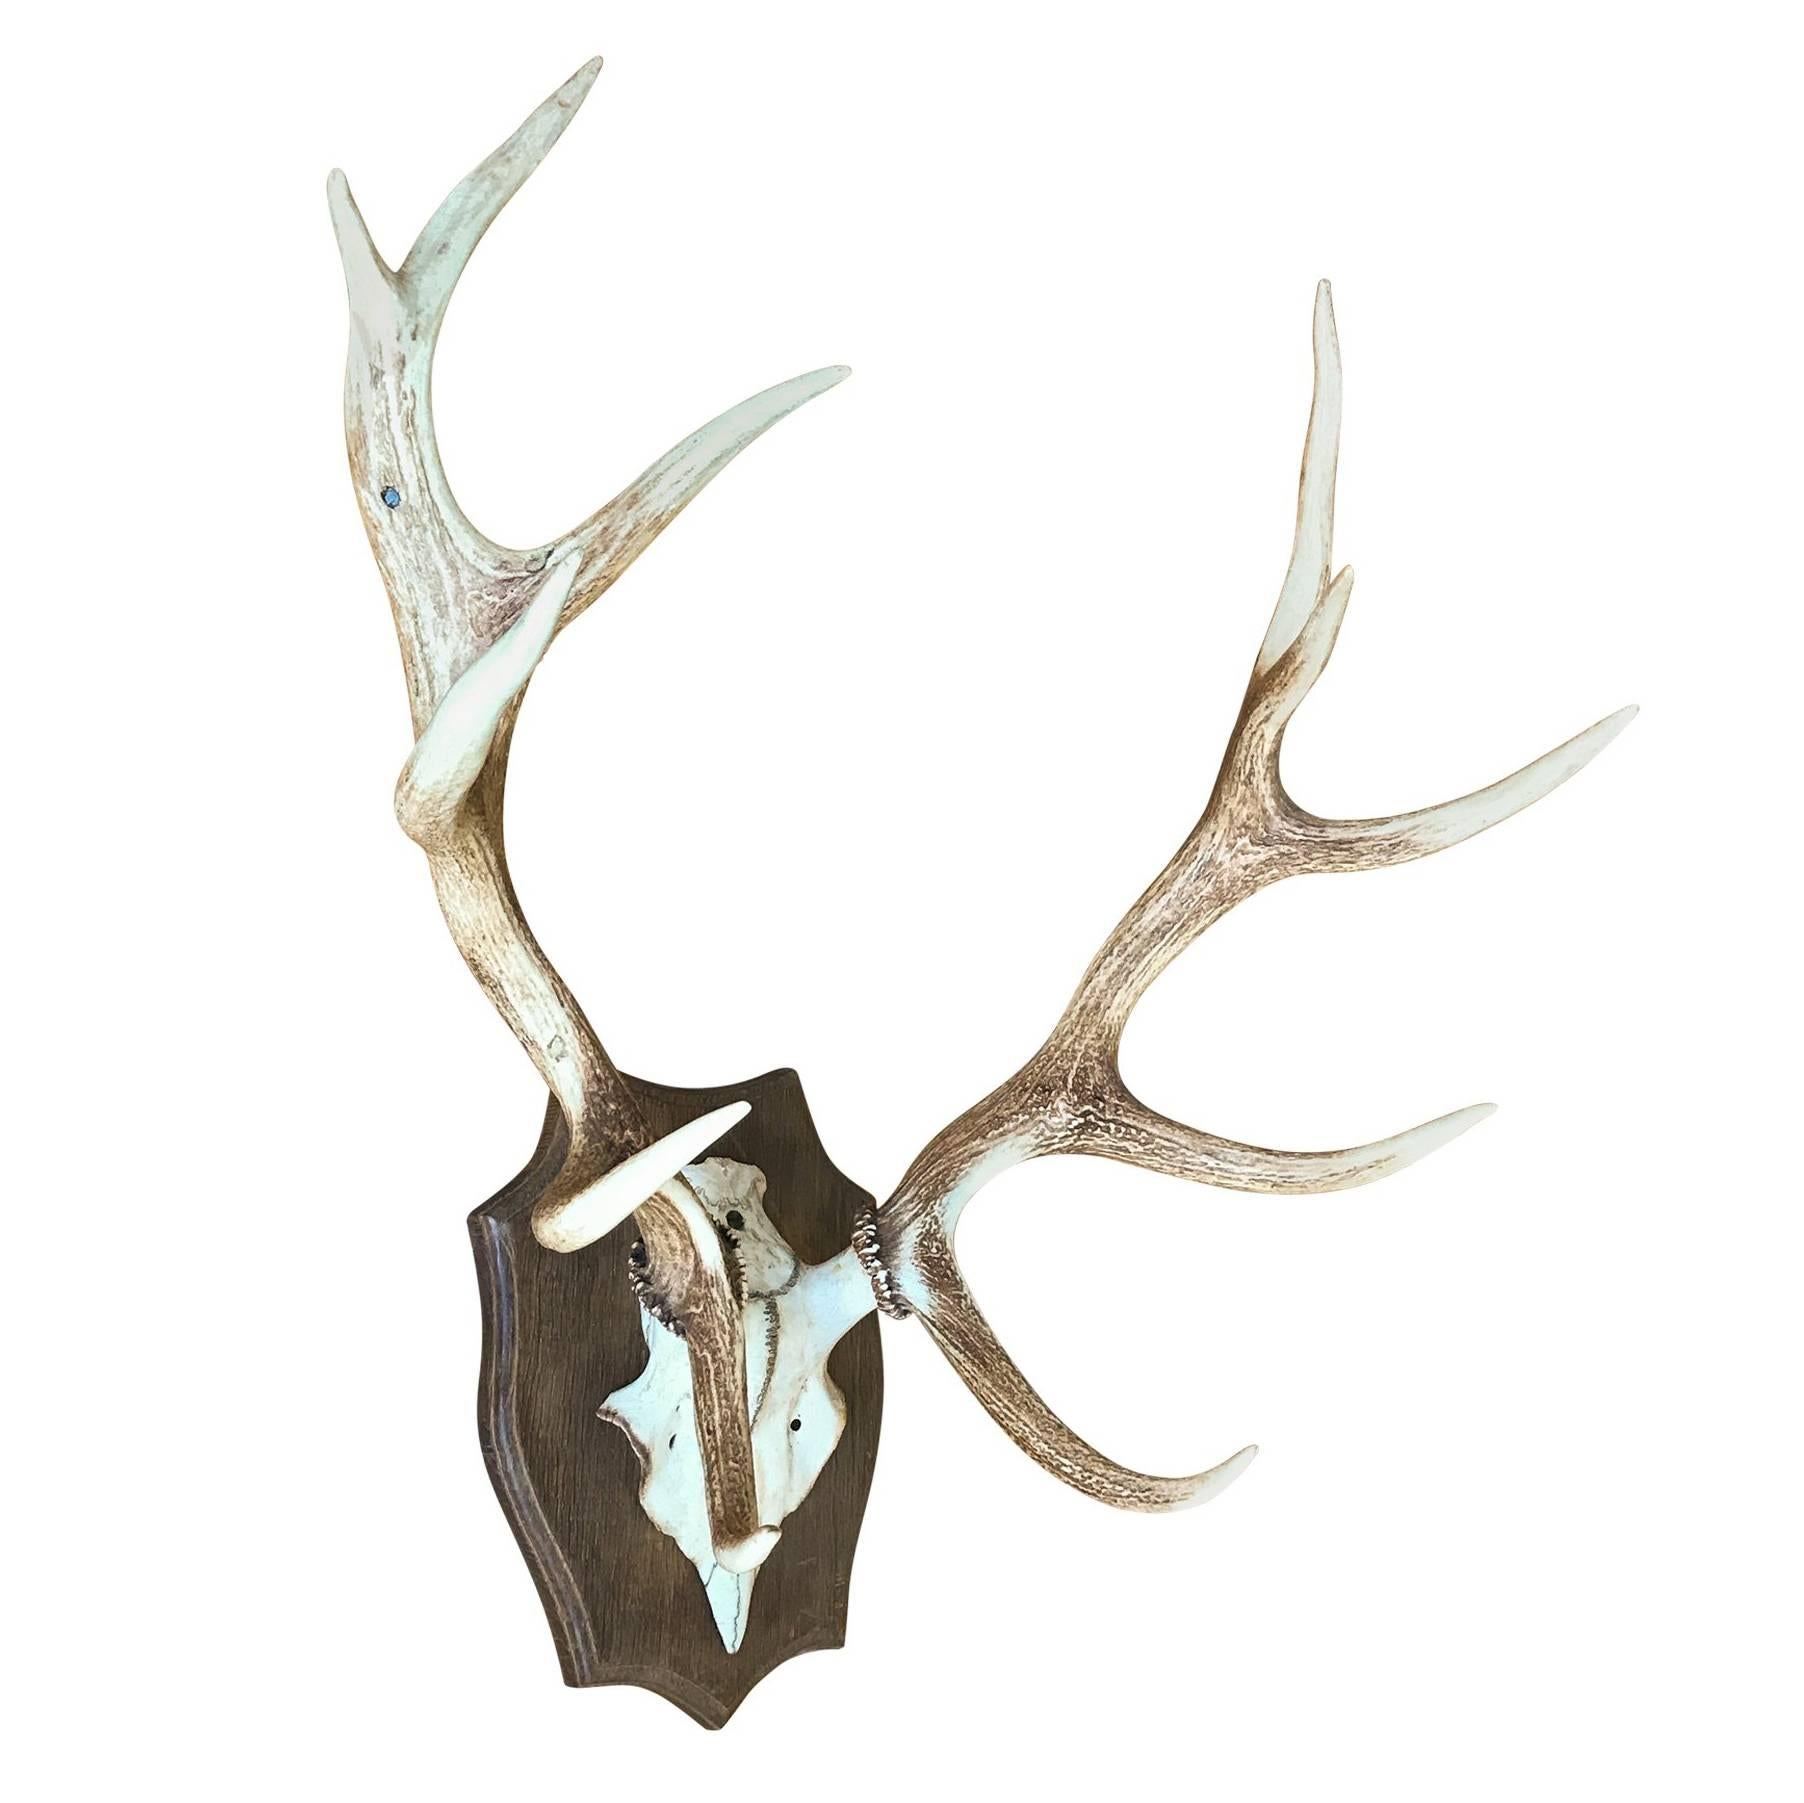 Pair of Mounted Stag Antlers